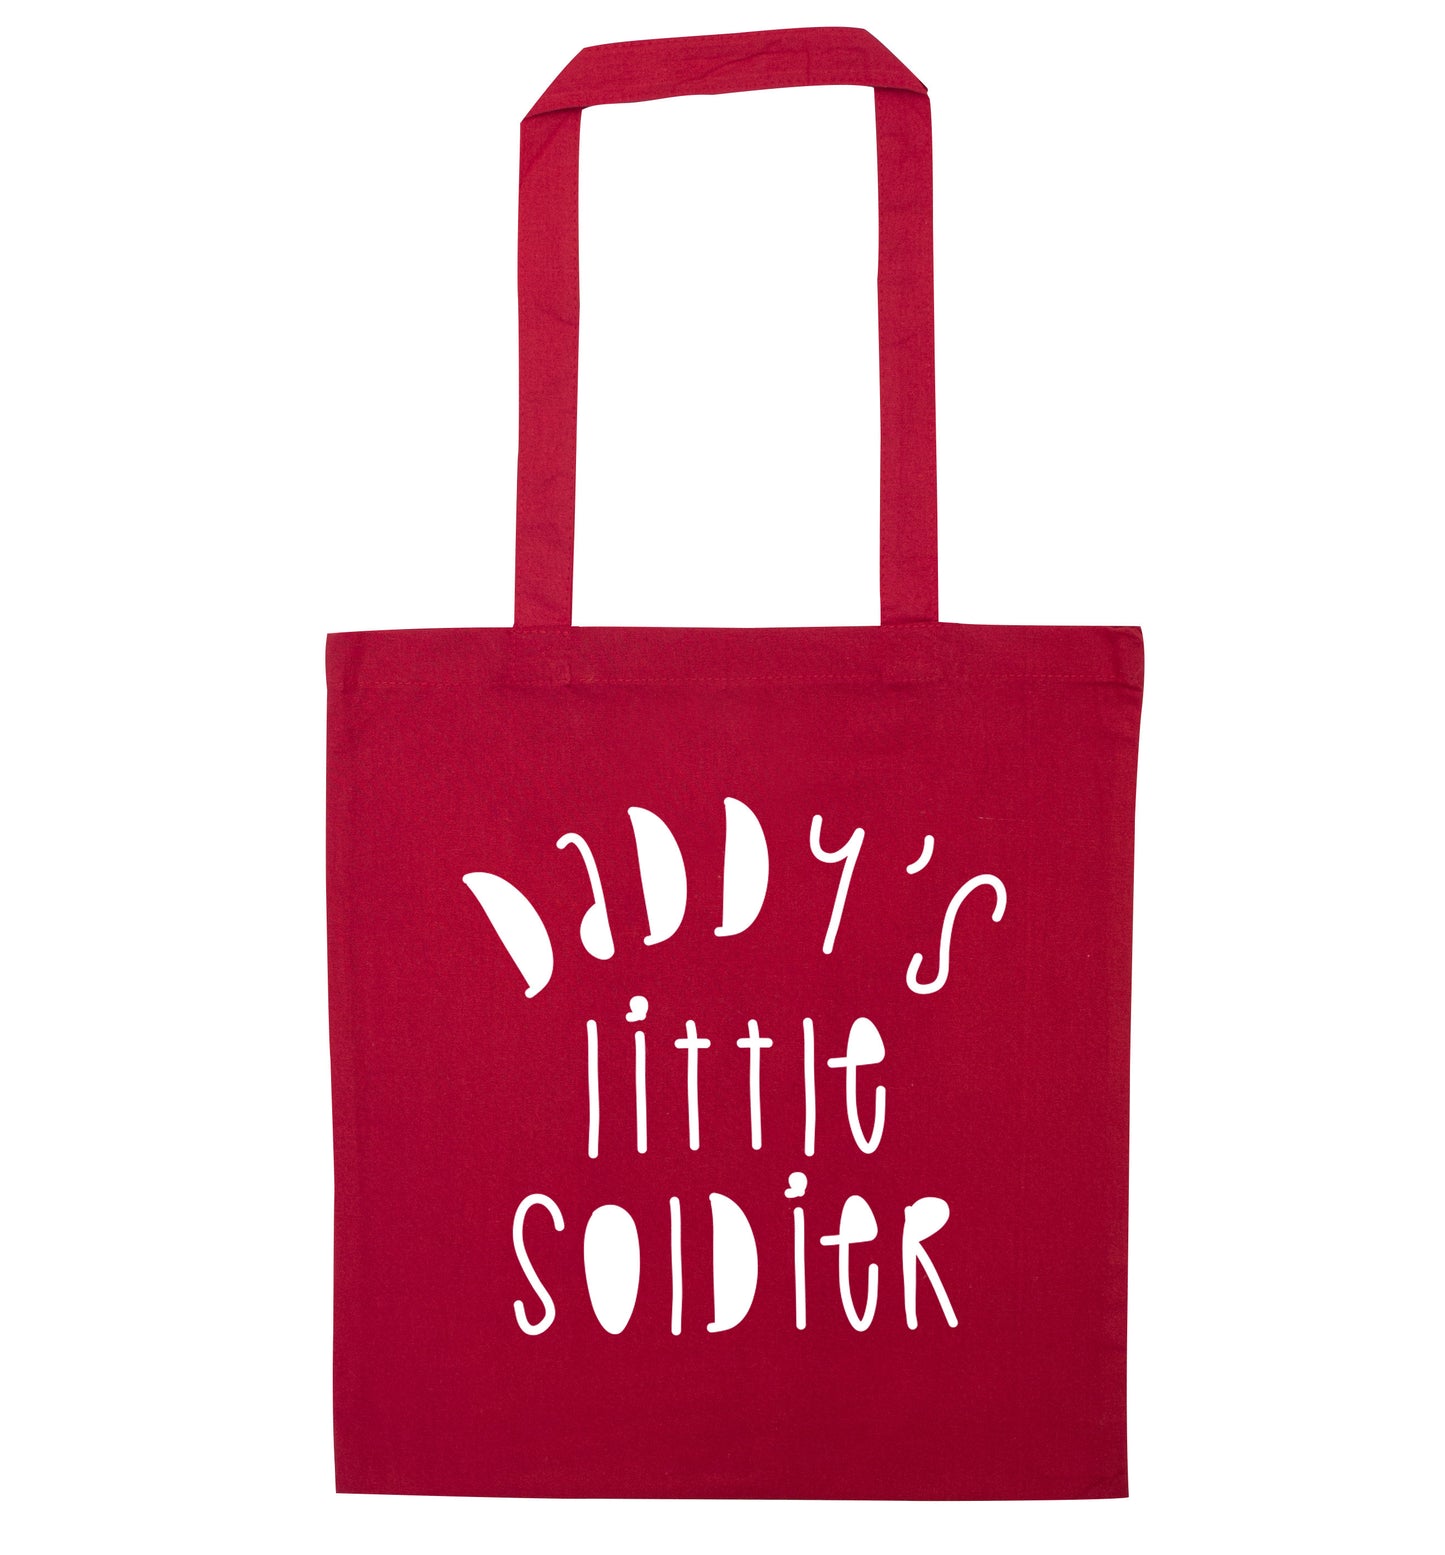 Daddy's little soldier red tote bag